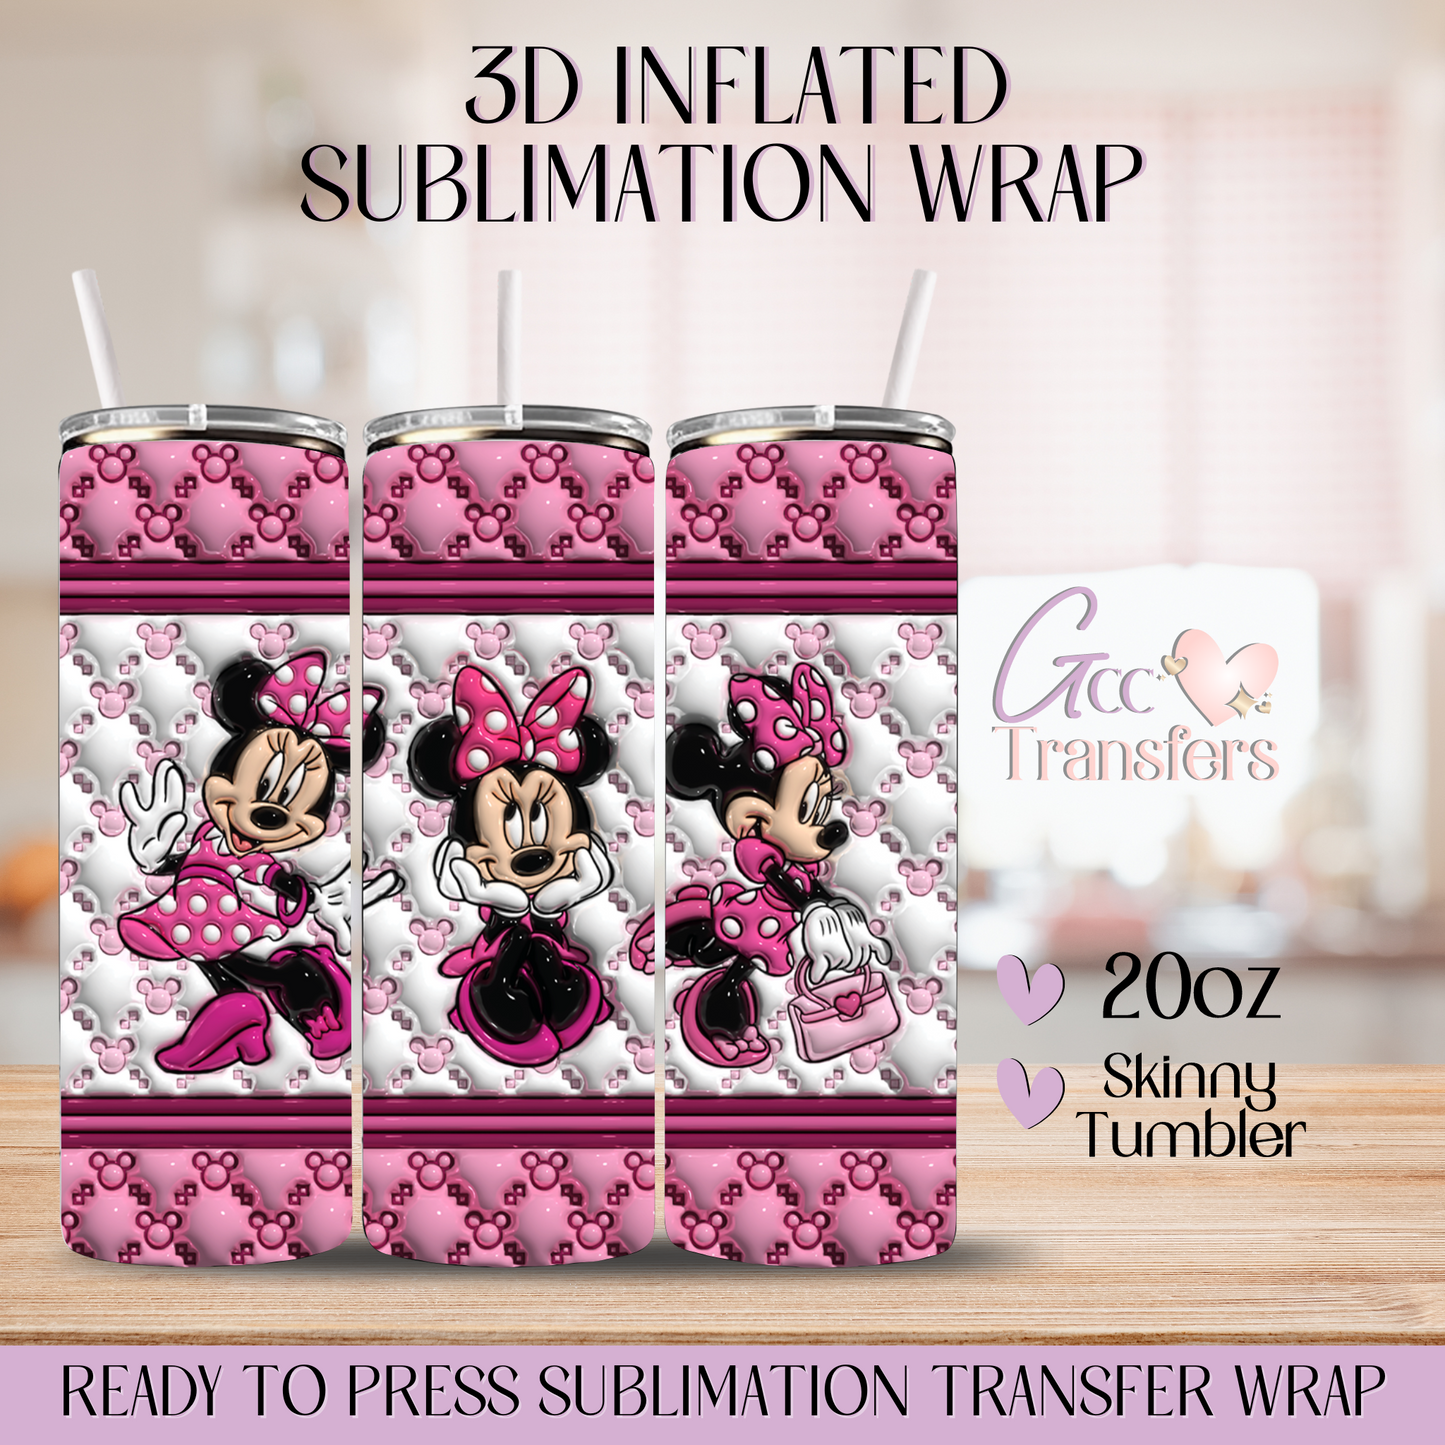 Pink Mouse Cartoon - 20oz 3D Inflated Sublimation Wrap